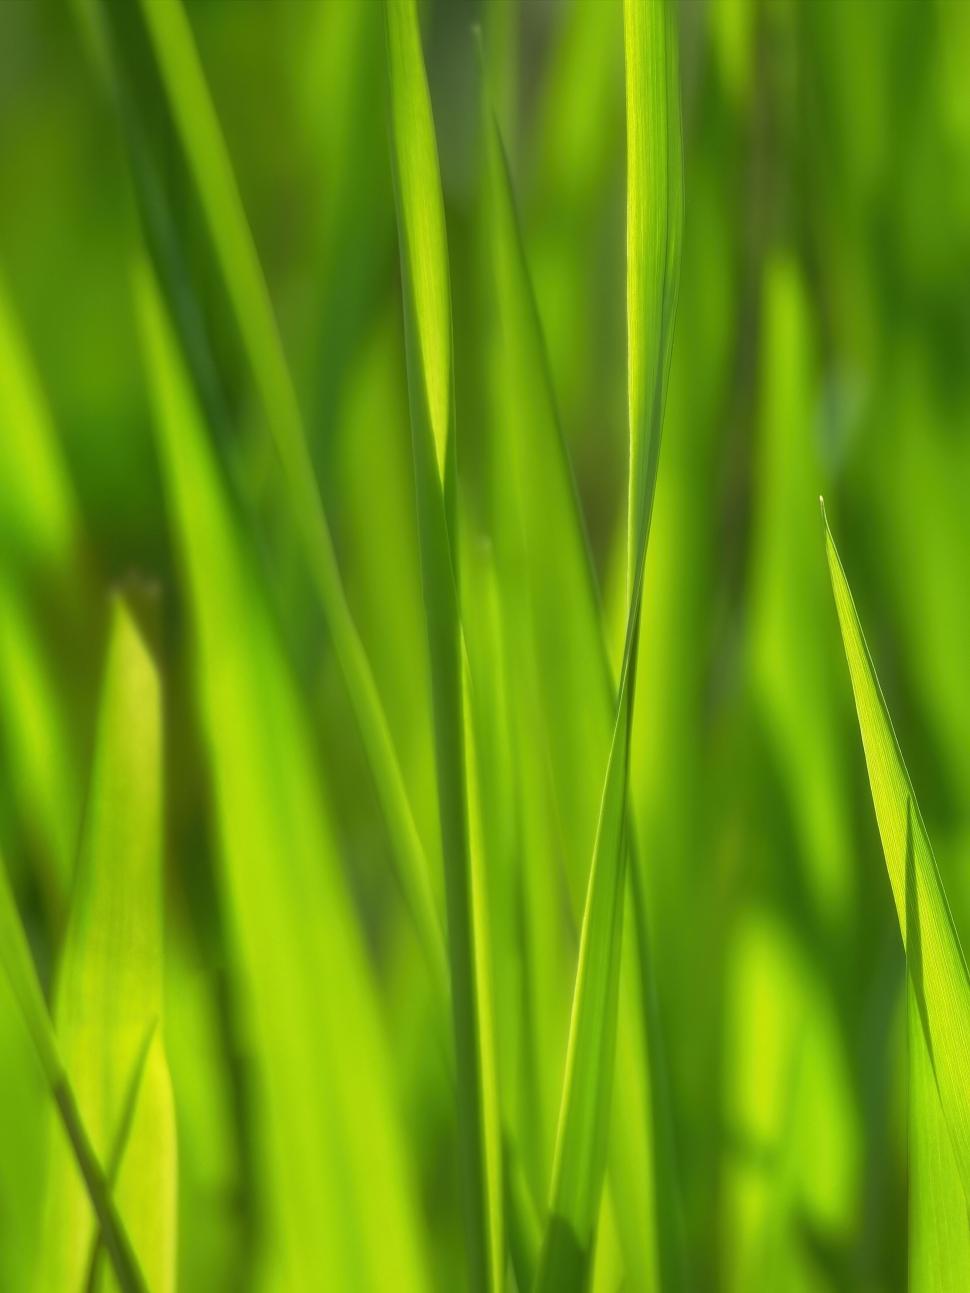 Free Image of Green grass blades up close in sunlight 